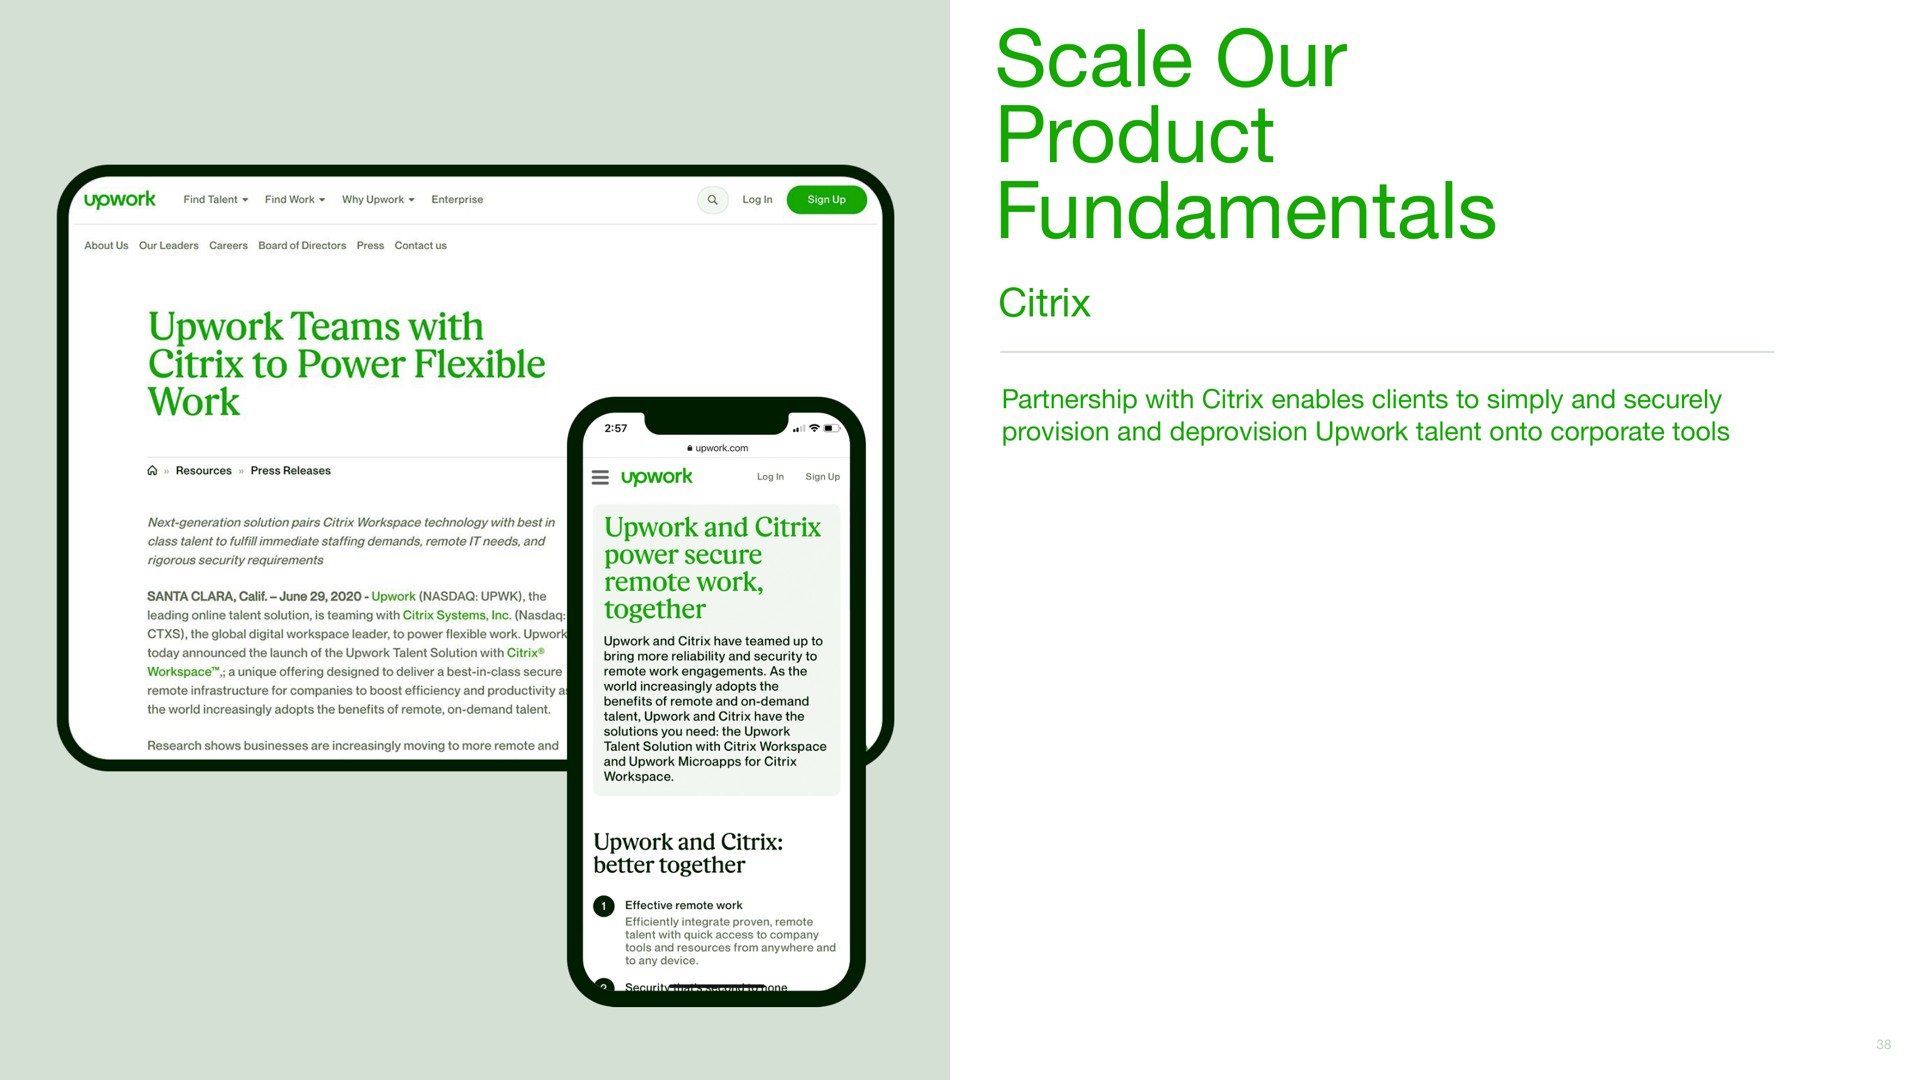 scale our product fundamentals | Upwork